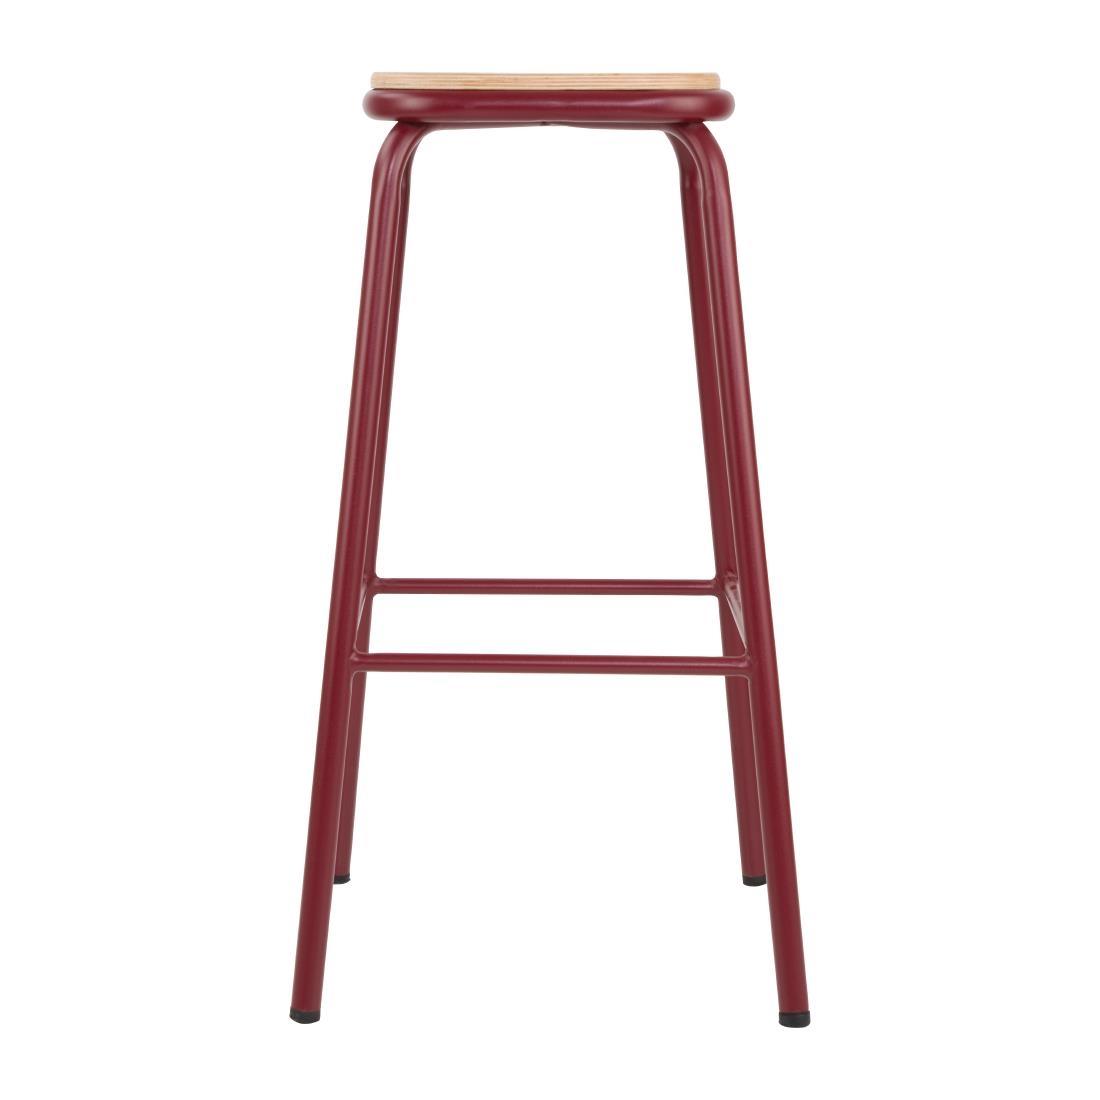 Bolero Cantina High Stools with Wooden Seat Pad Wine Red (Pack of 4) - FB937  - 2